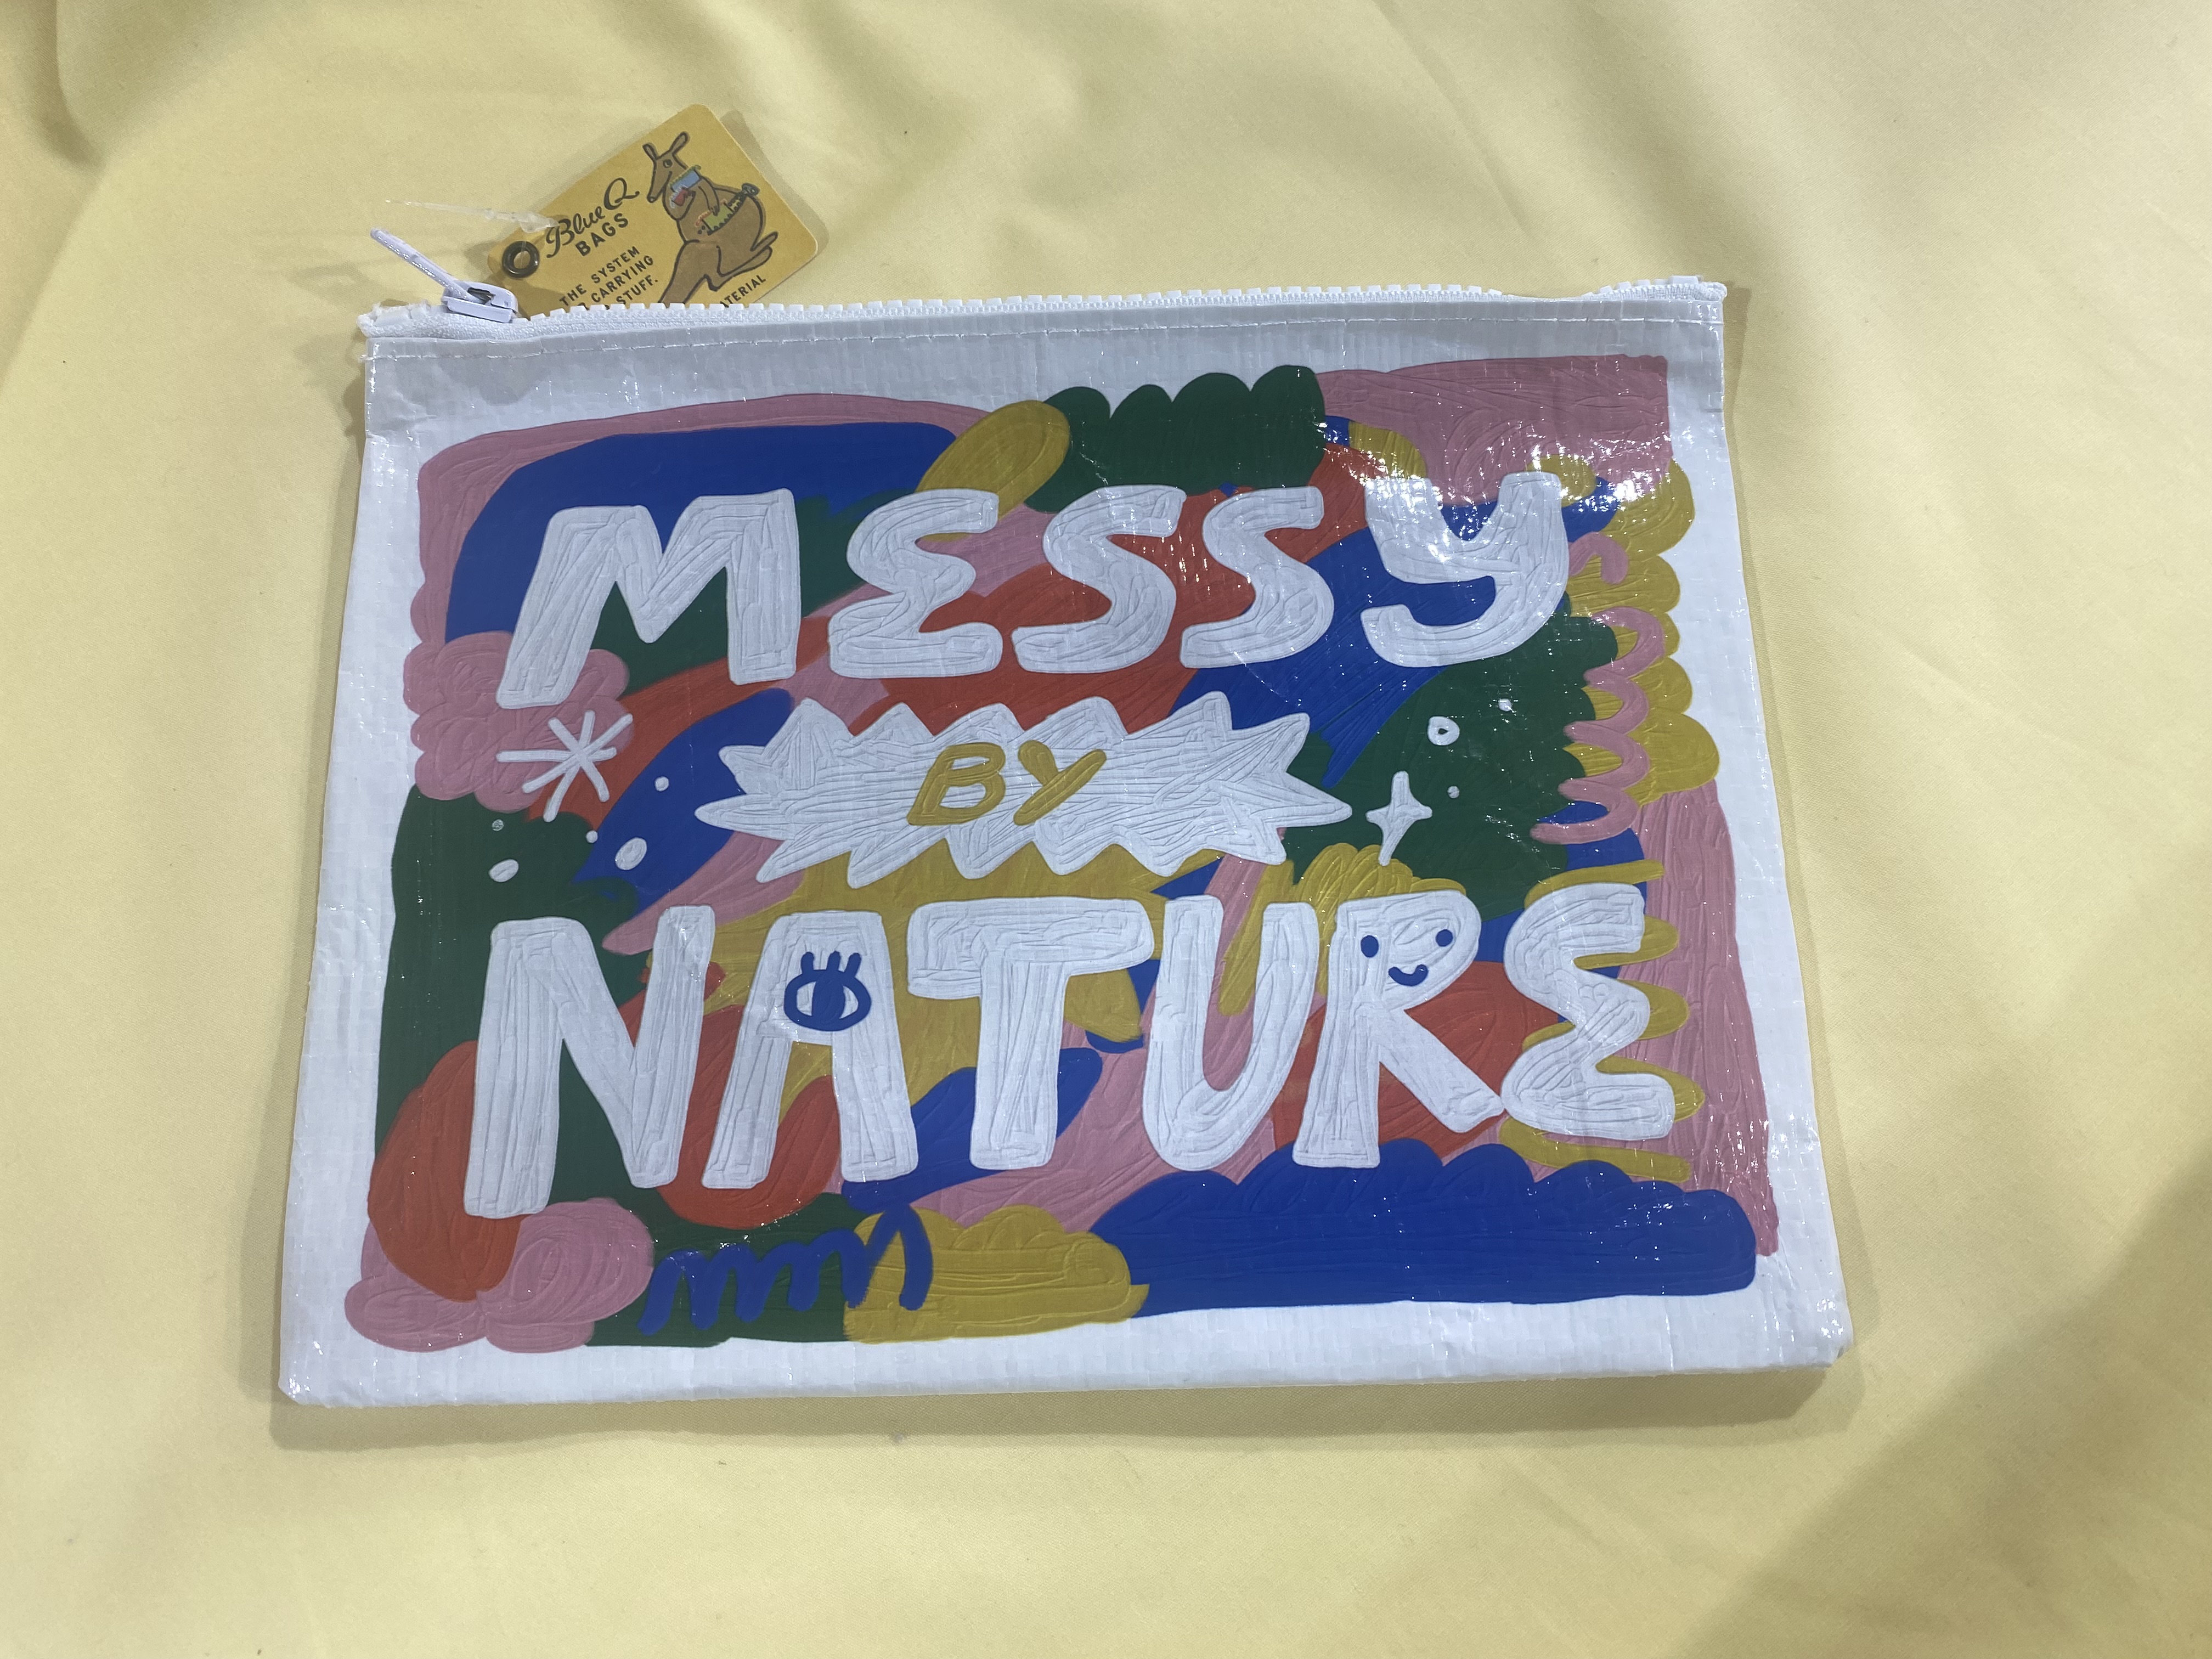 Messy By Nature Pouch